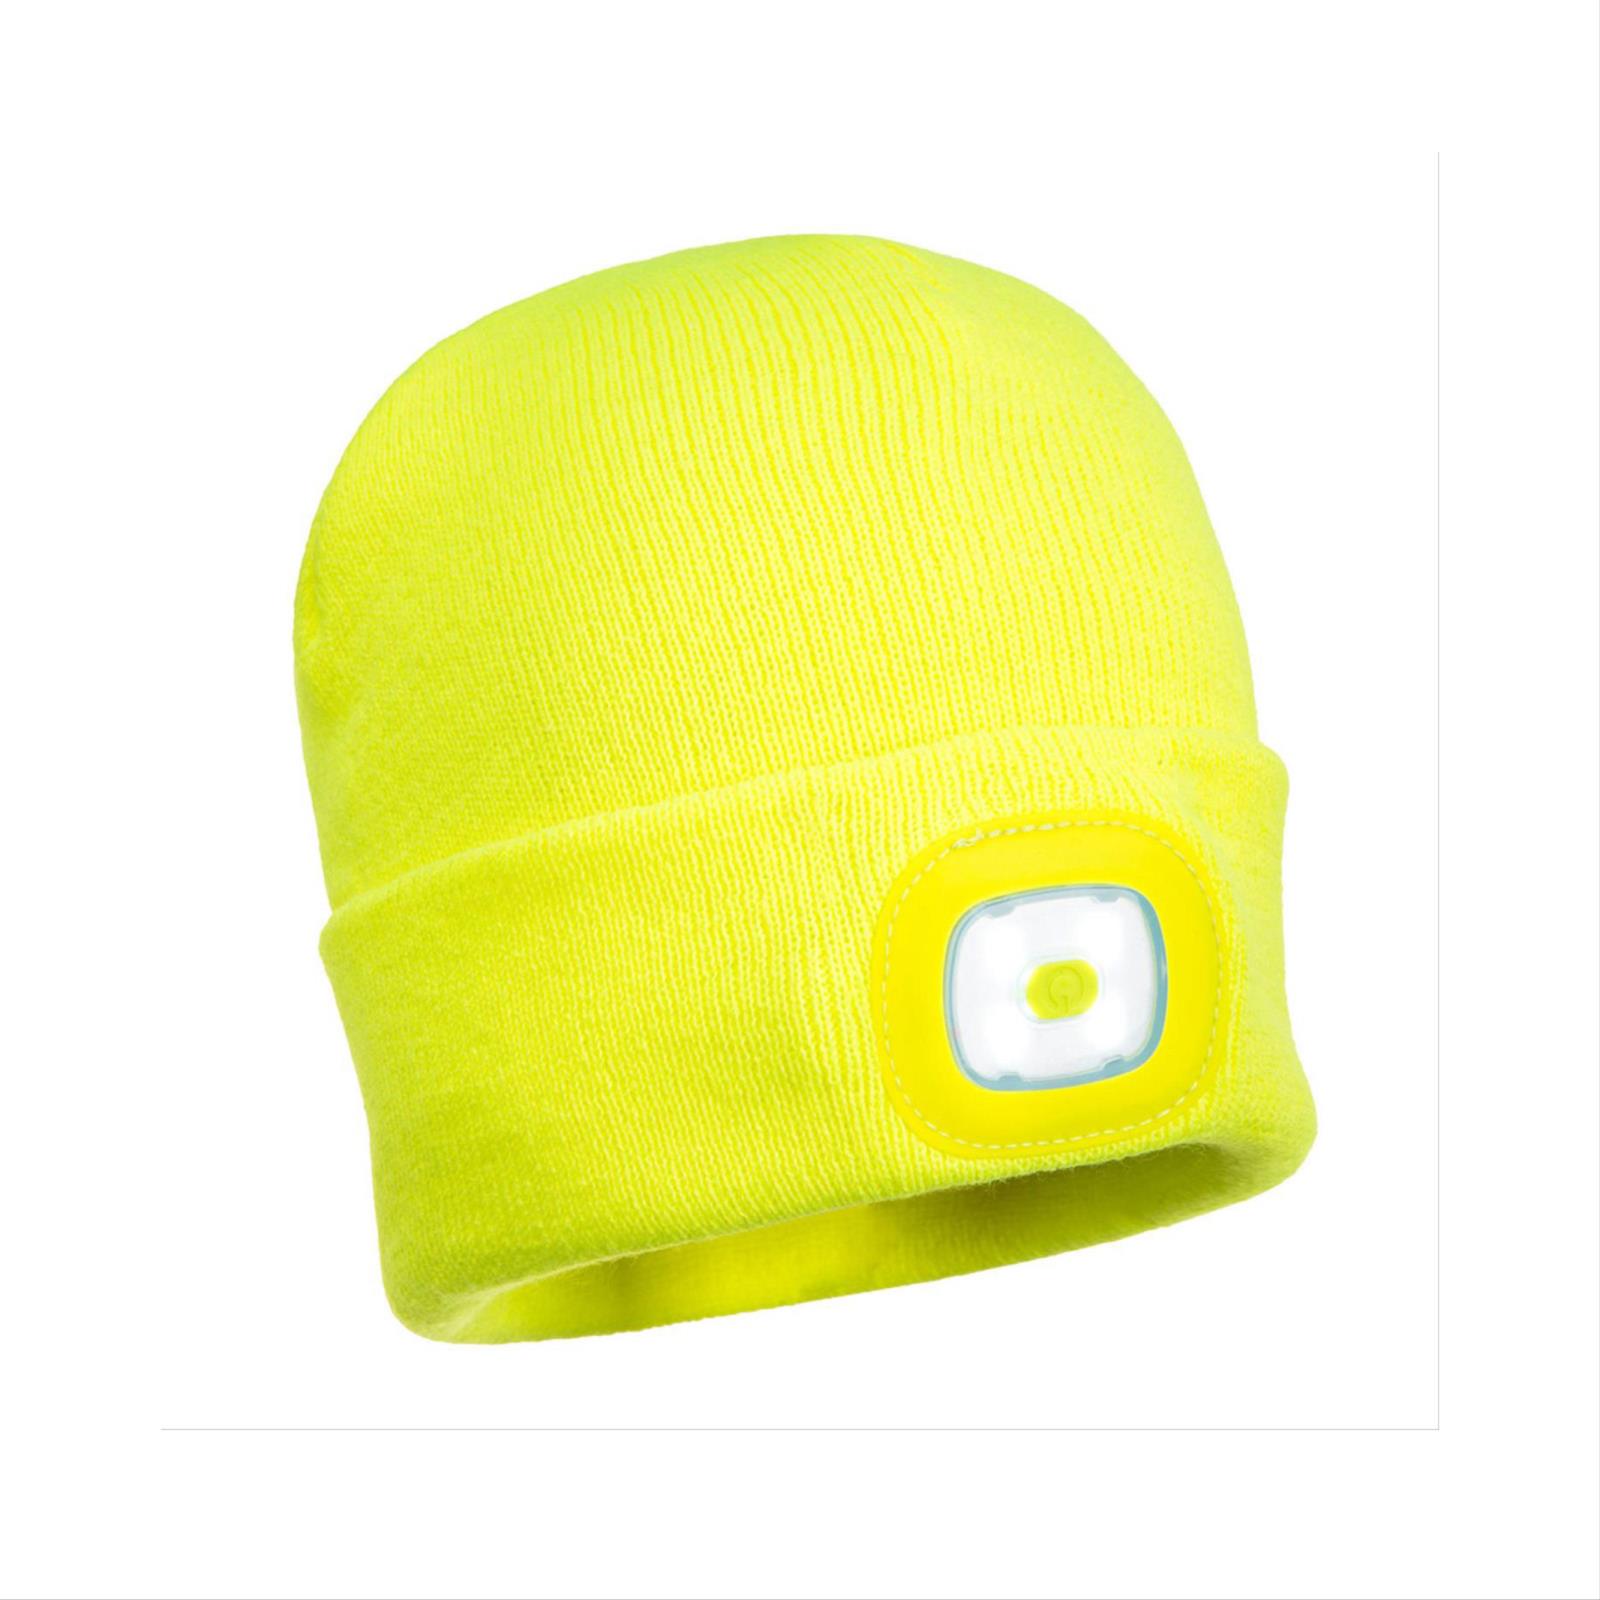 Beanie with LED Head Light, USB Rechargeable